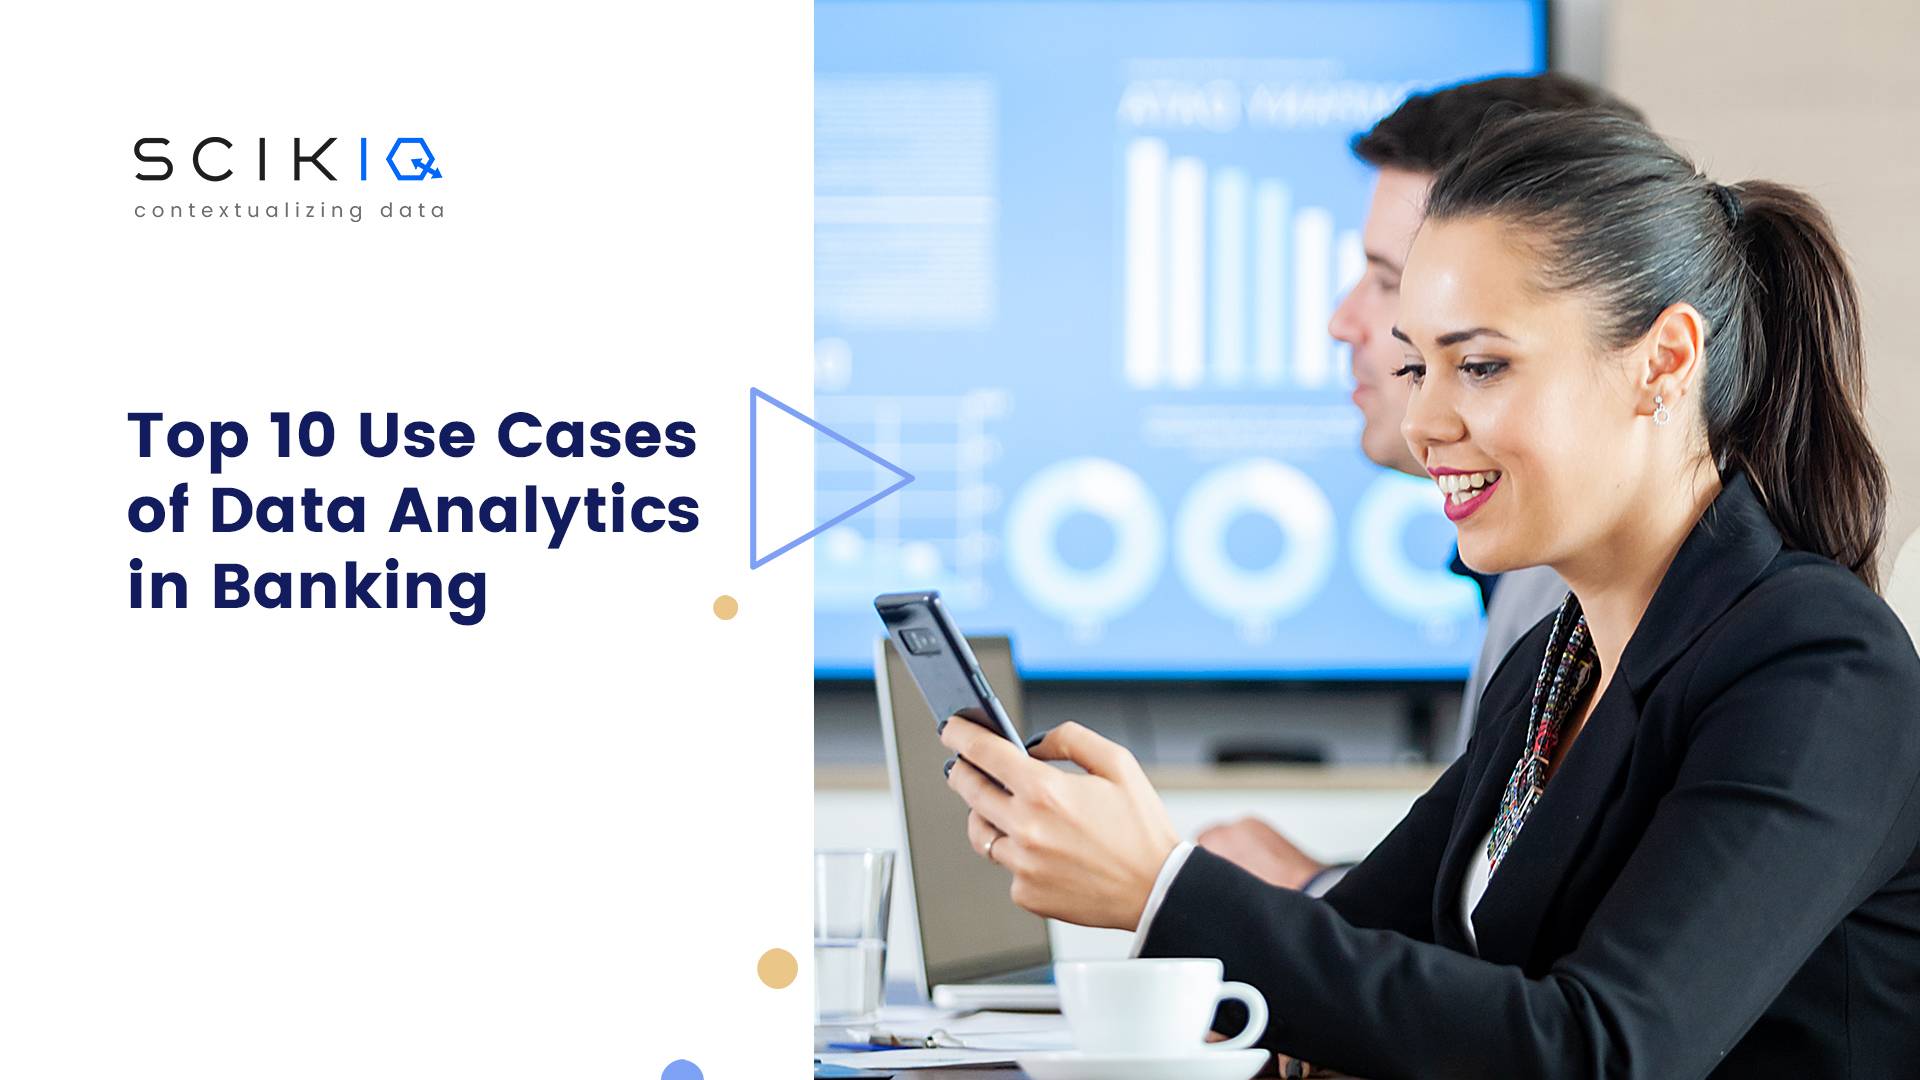 Top 10 Use Cases of Data Analytics in Banking